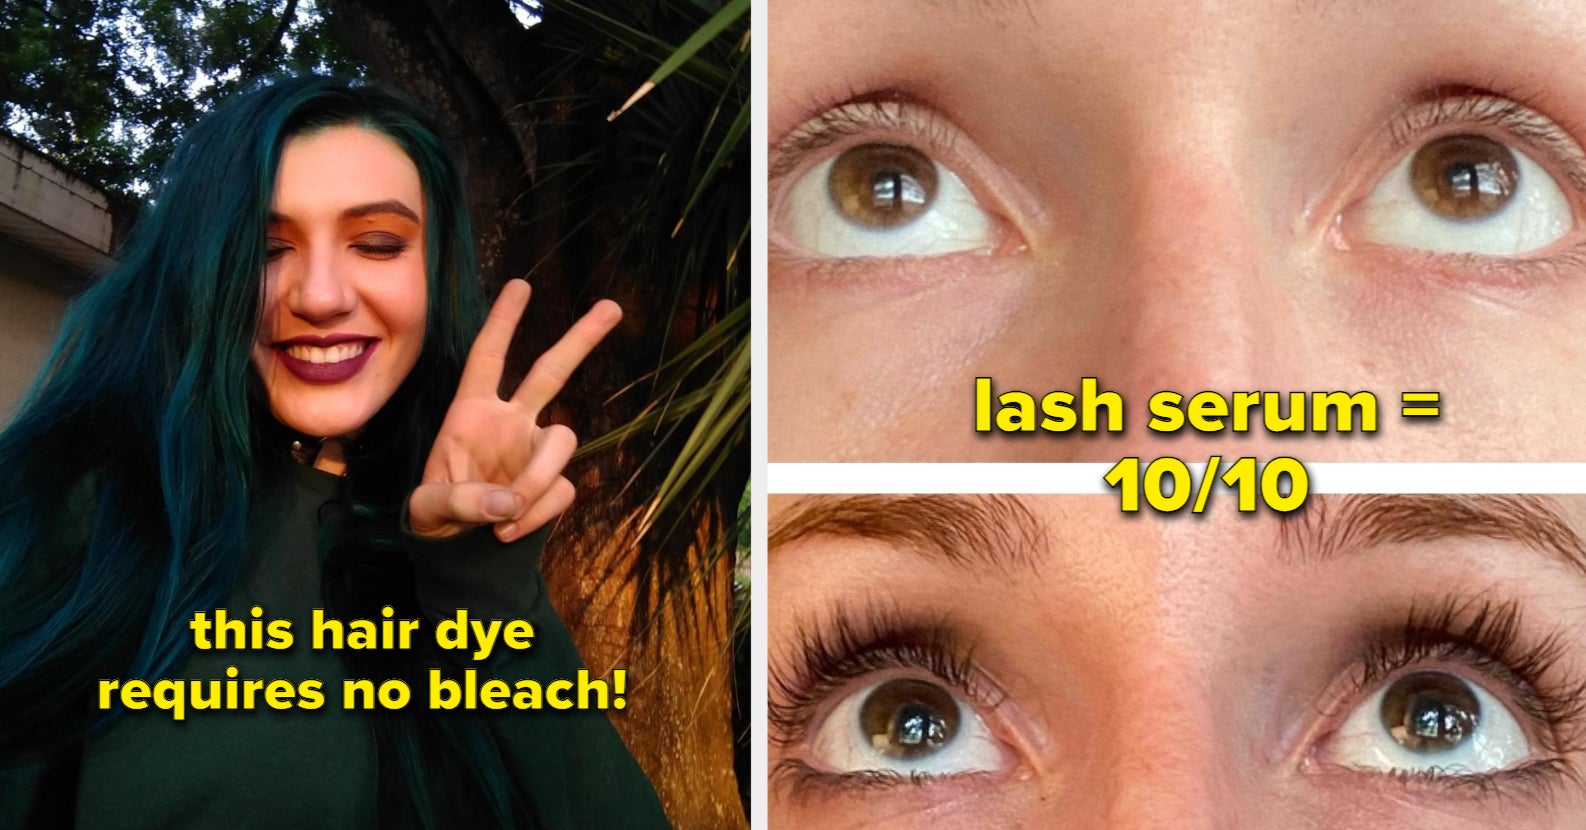 27 Summer Beauty That Do What They Say They Will